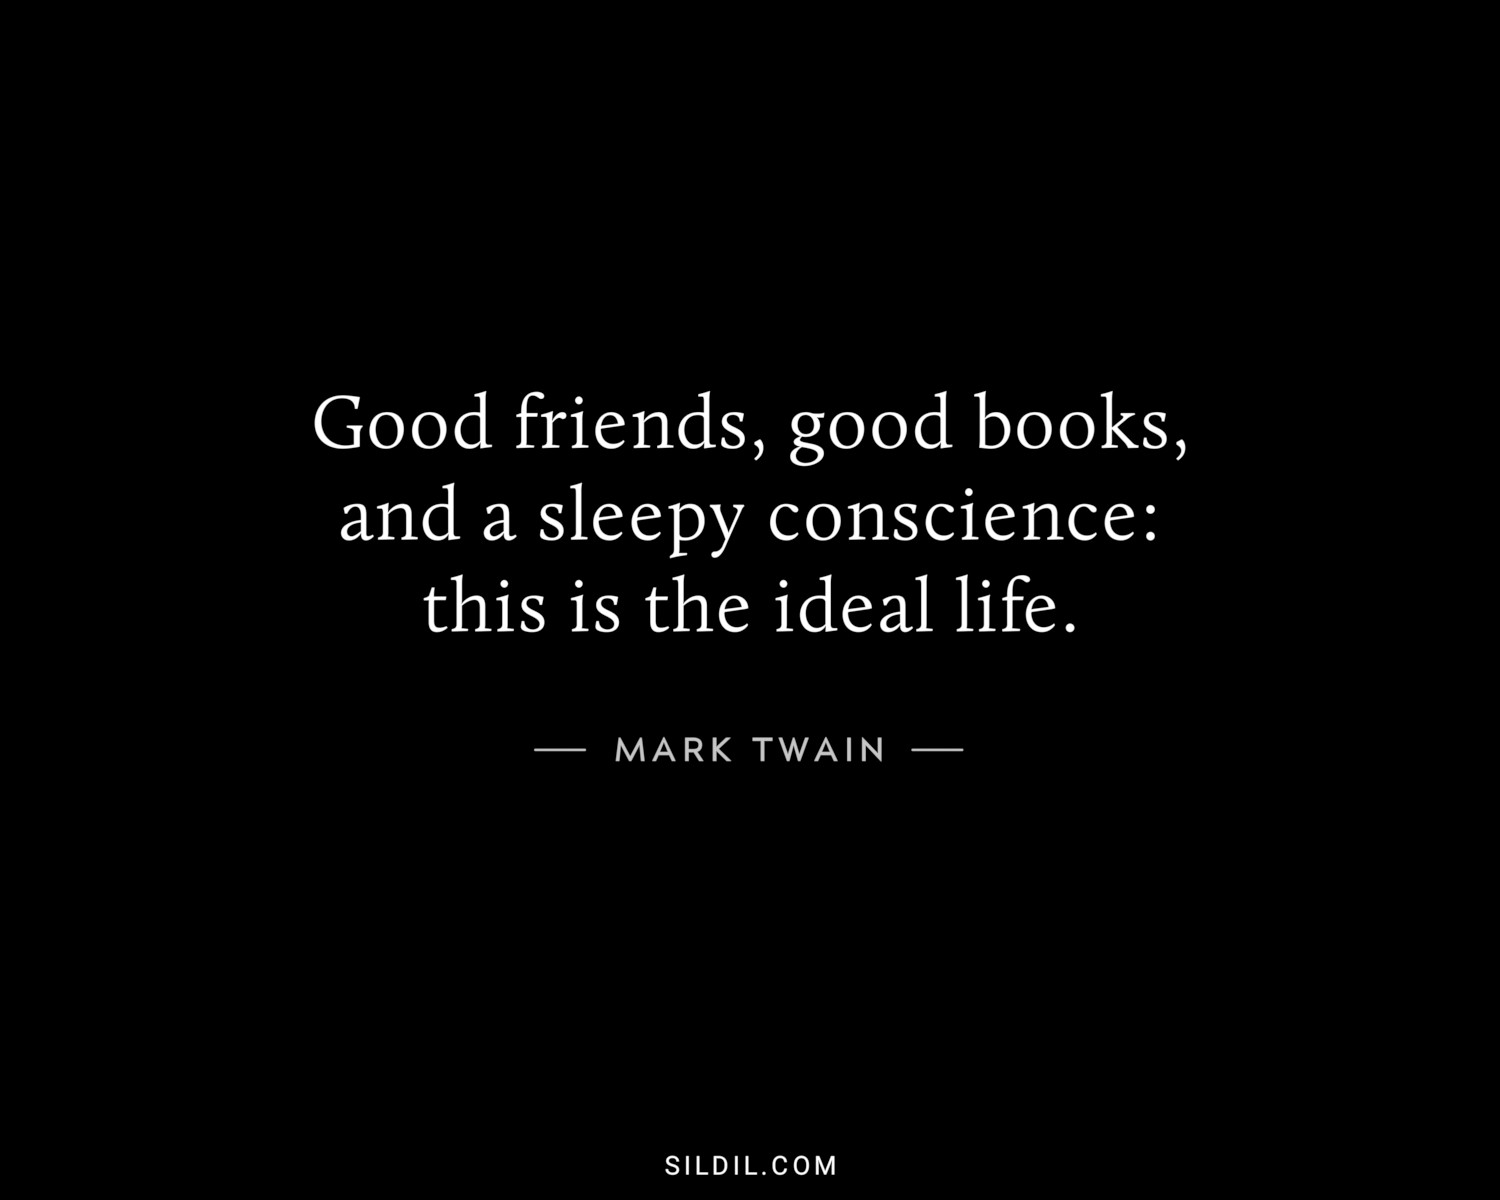 Good friends, good books, and a sleepy conscience: this is the ideal life.